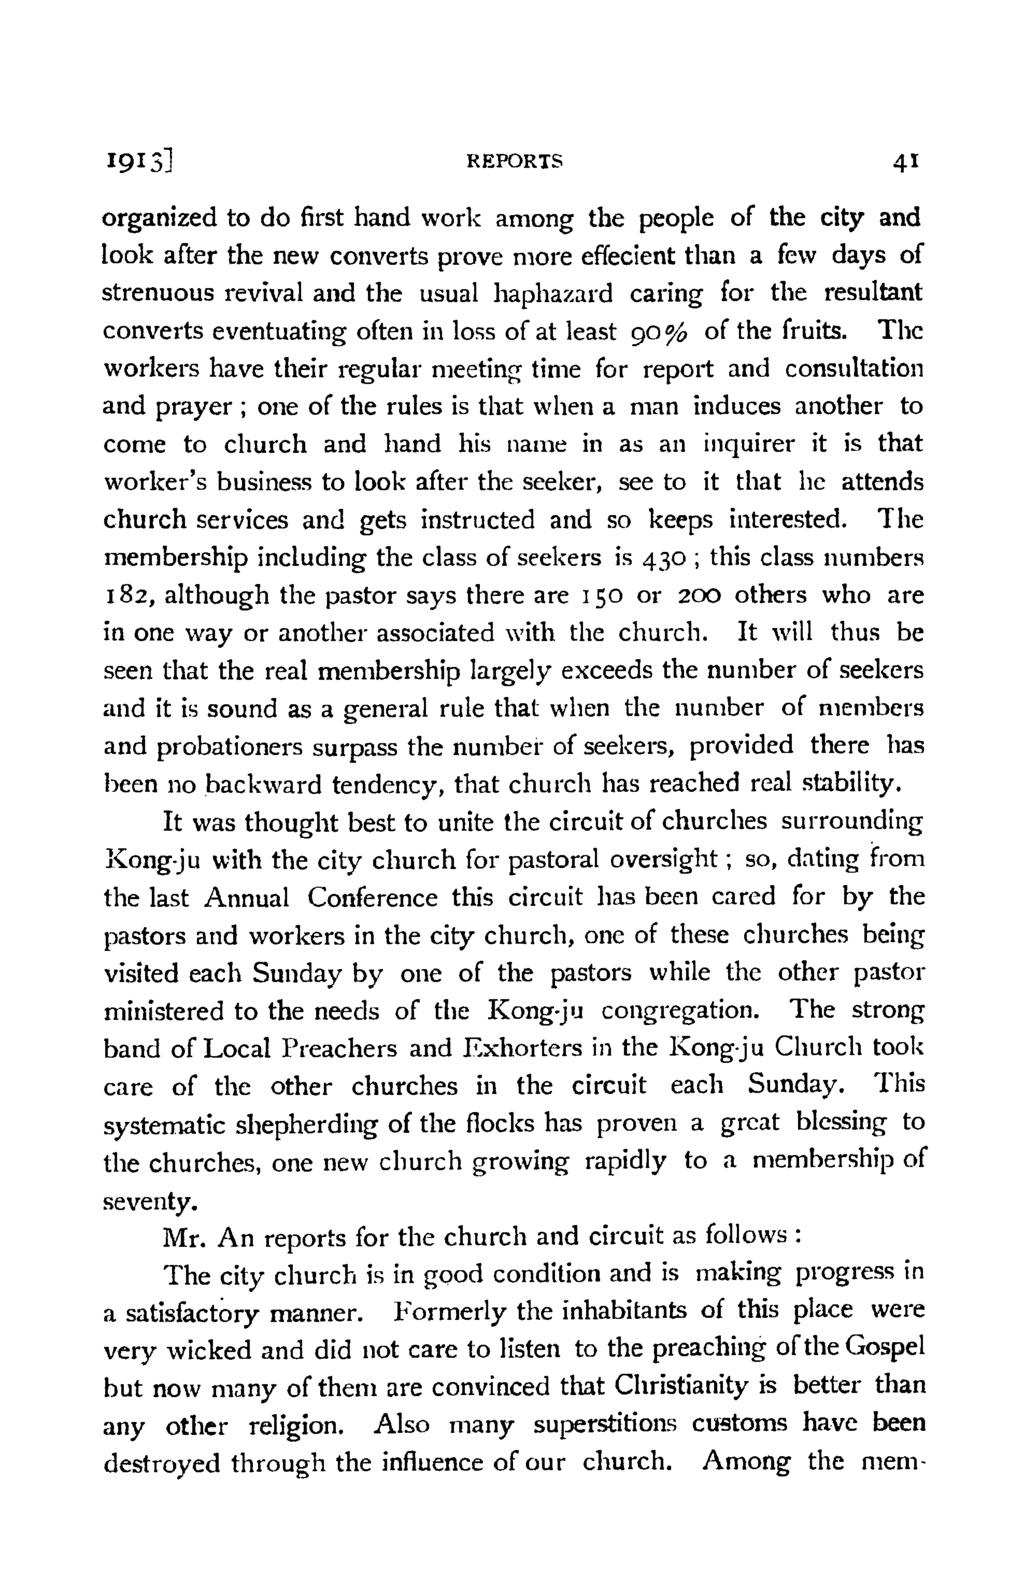 191 3J REPORTS organized to do first hand work among the people of the city and look after the new converts prove more effecient than a few days of strenuous revival and the usual haphazard caring